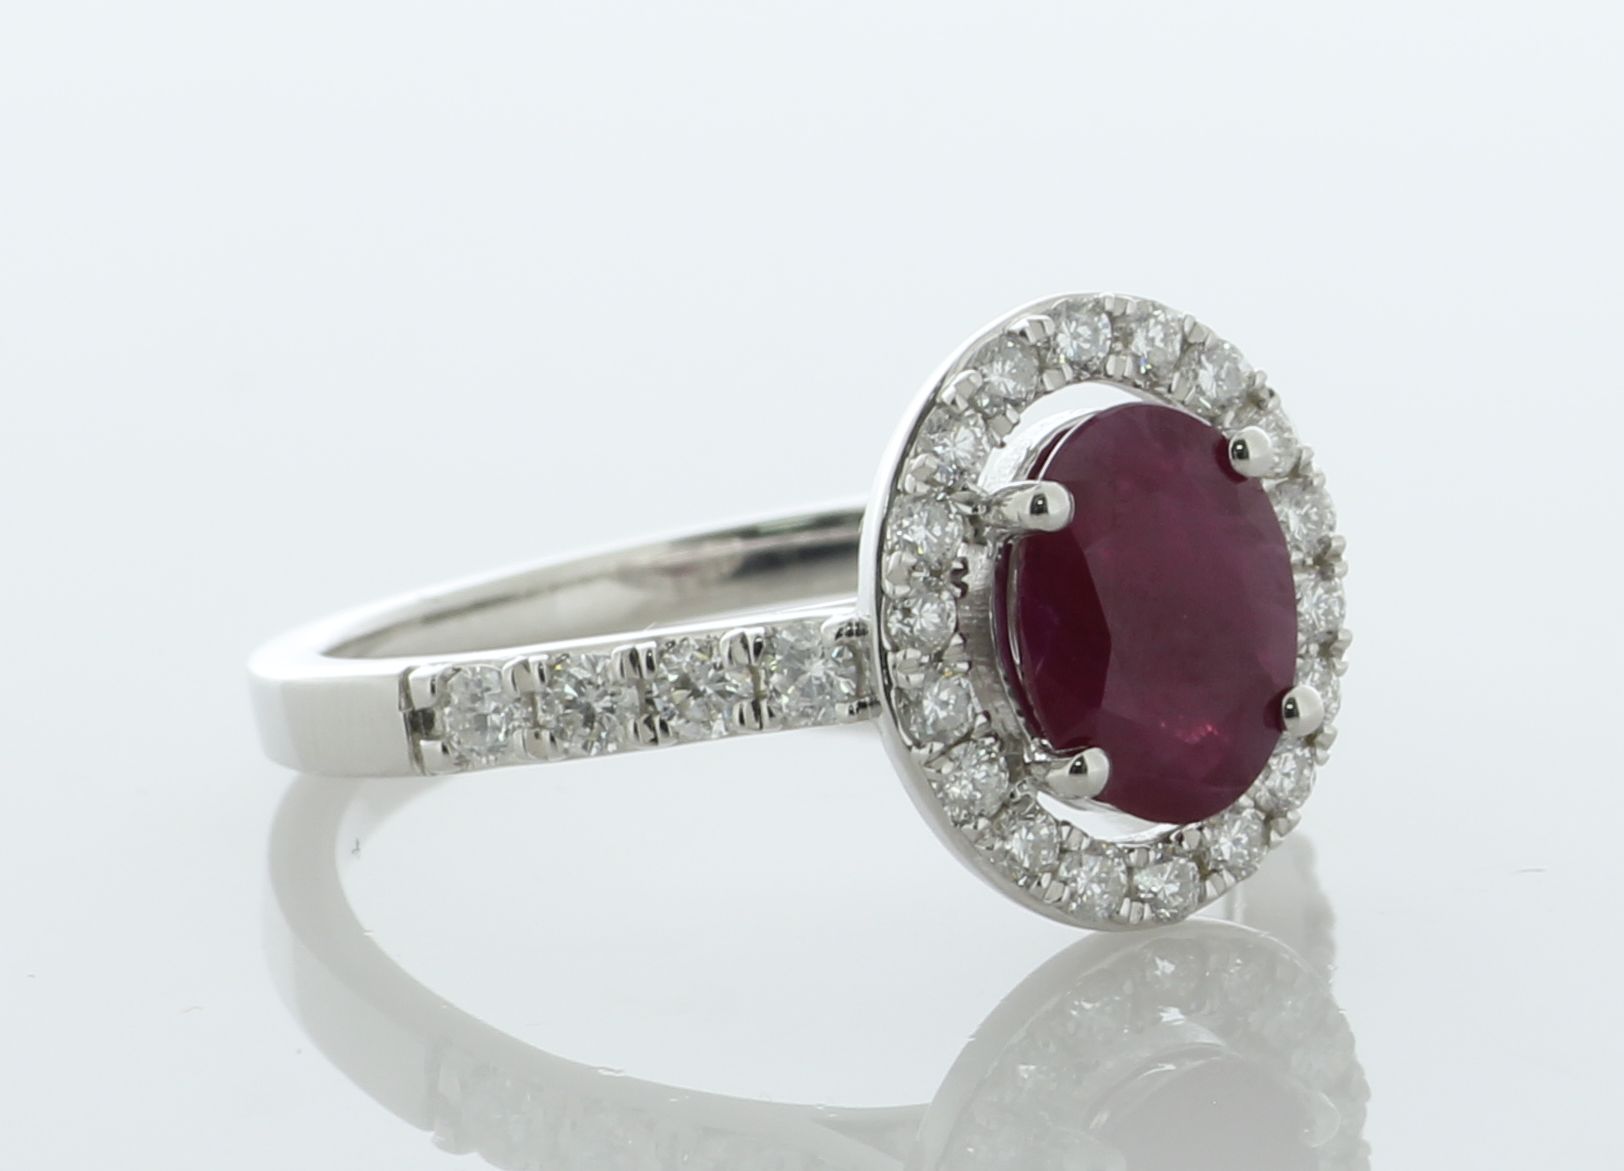 18ct White Gold Ladies Cluster Diamond And Ruby Ring (R2.00) 0.65 Carats - Valued By AGI £6,950.00 - - Image 2 of 5